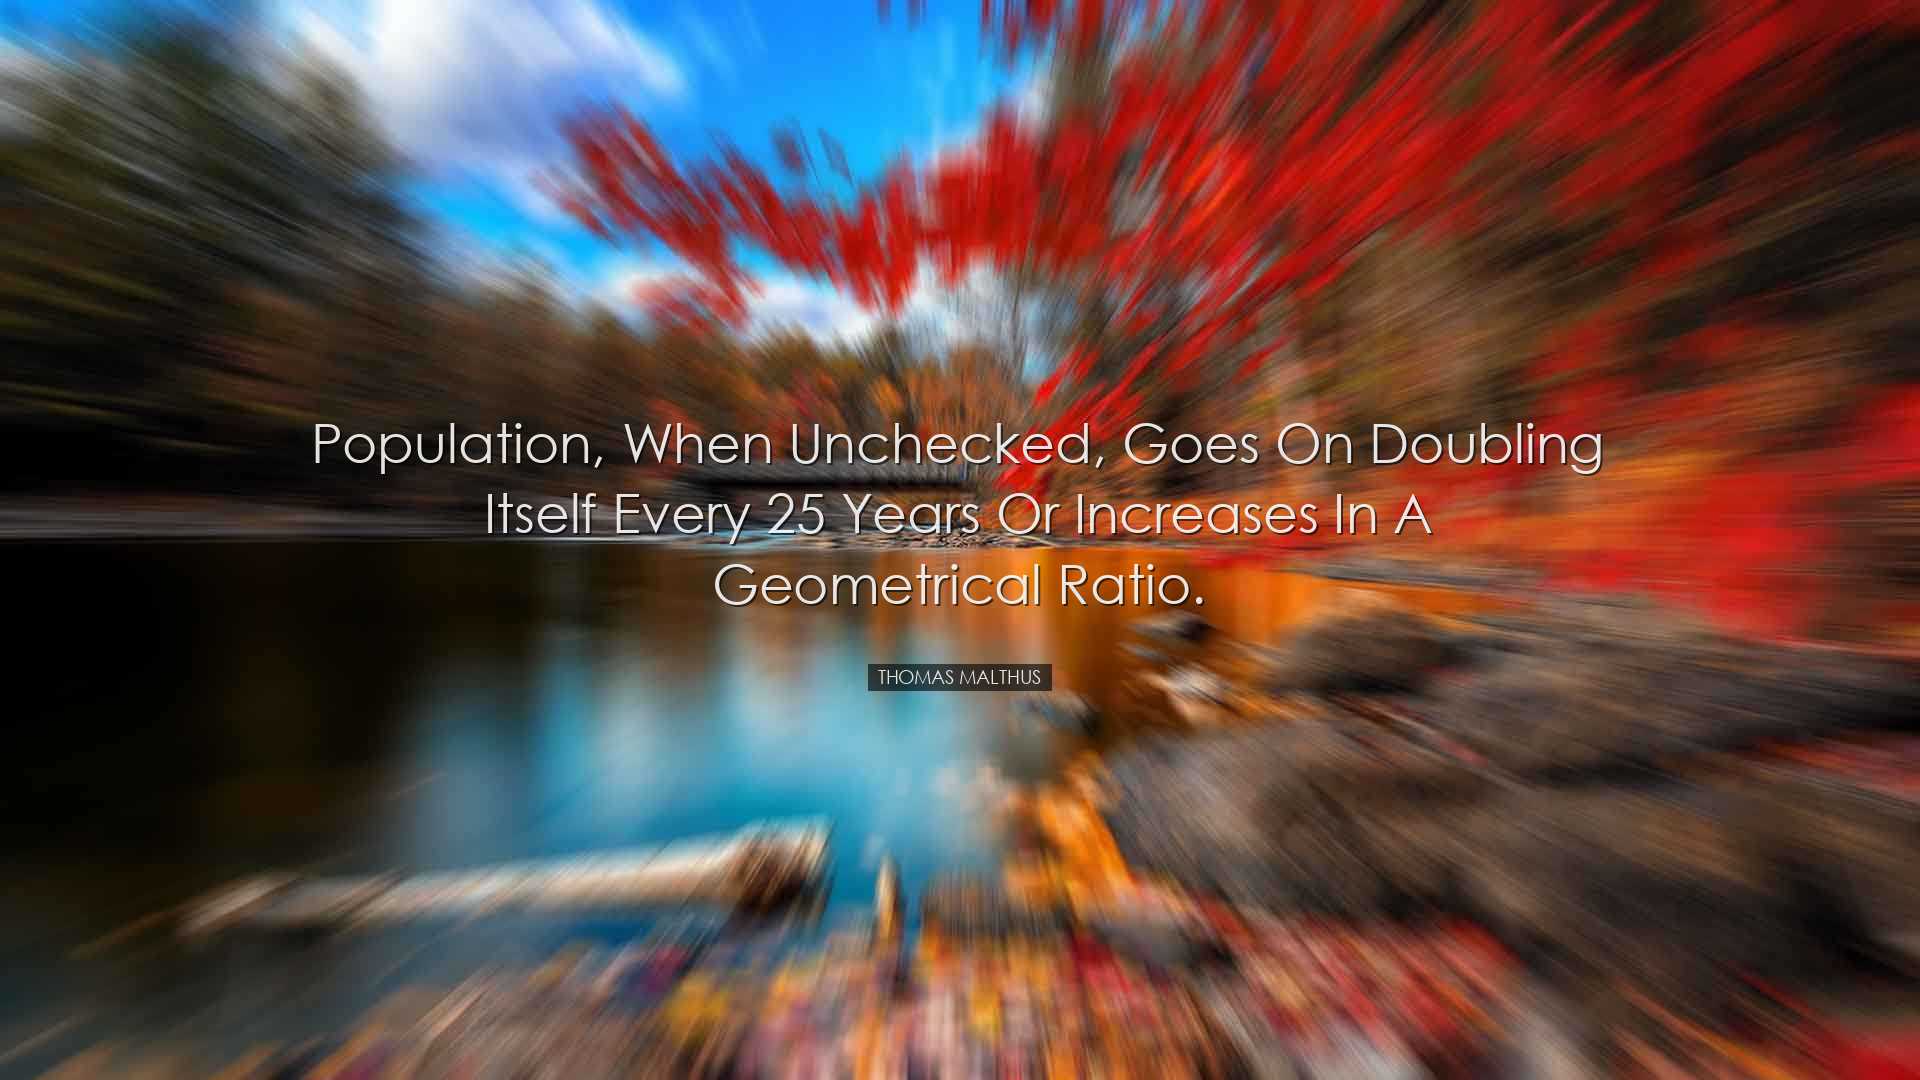 Population, when unchecked, goes on doubling itself every 25 years